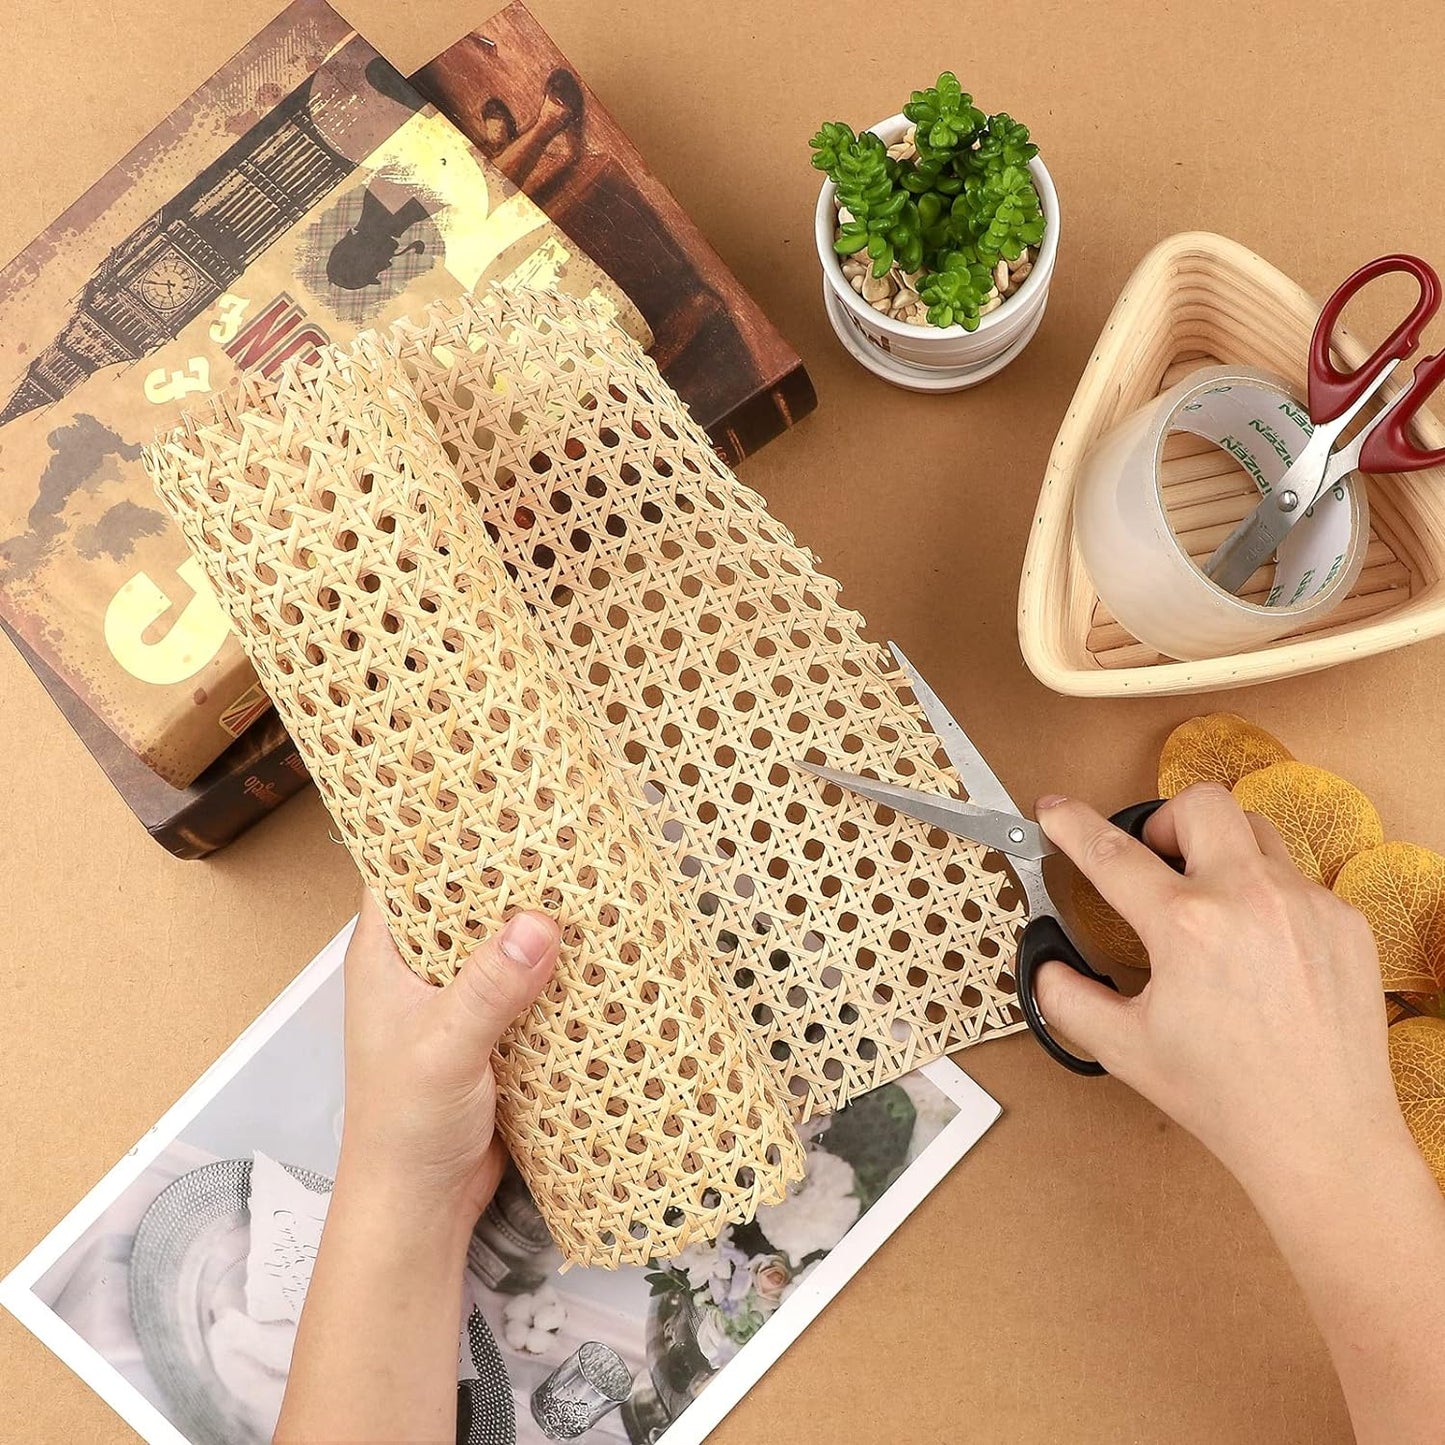 18 Inches Width Rattan Cane Webbing Roll Caning Material Weave Rattan Fabric Furniture for Caning Projects Pre Woven Open Mesh Cane for Cabinet Bed Chair Repair Caning Material DIY Supplies (2 Feet)